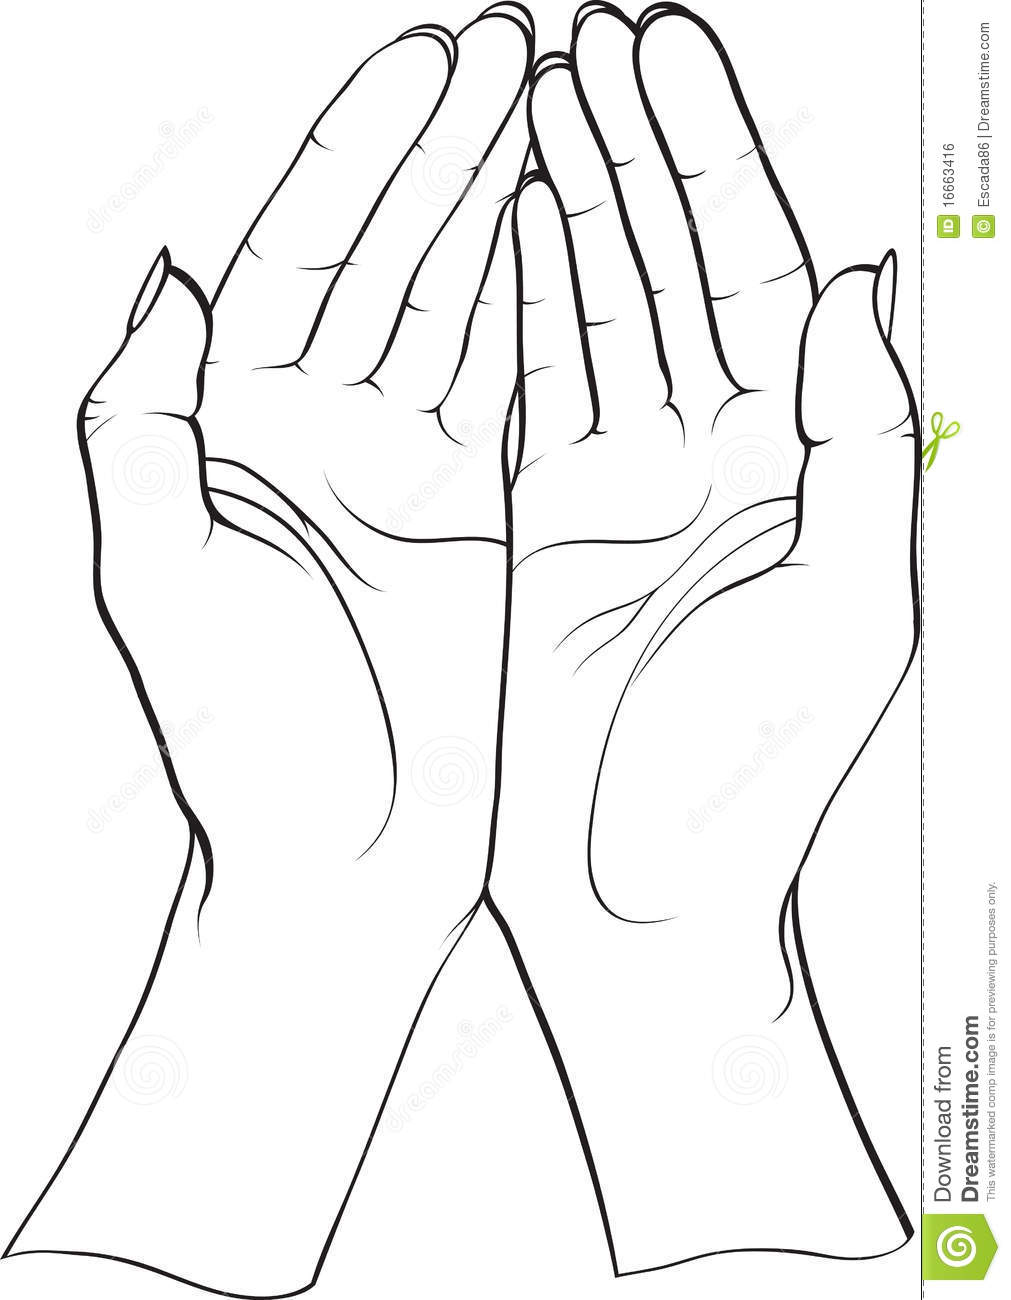 Two Hands Royalty Free Stock Image   Image  16663416